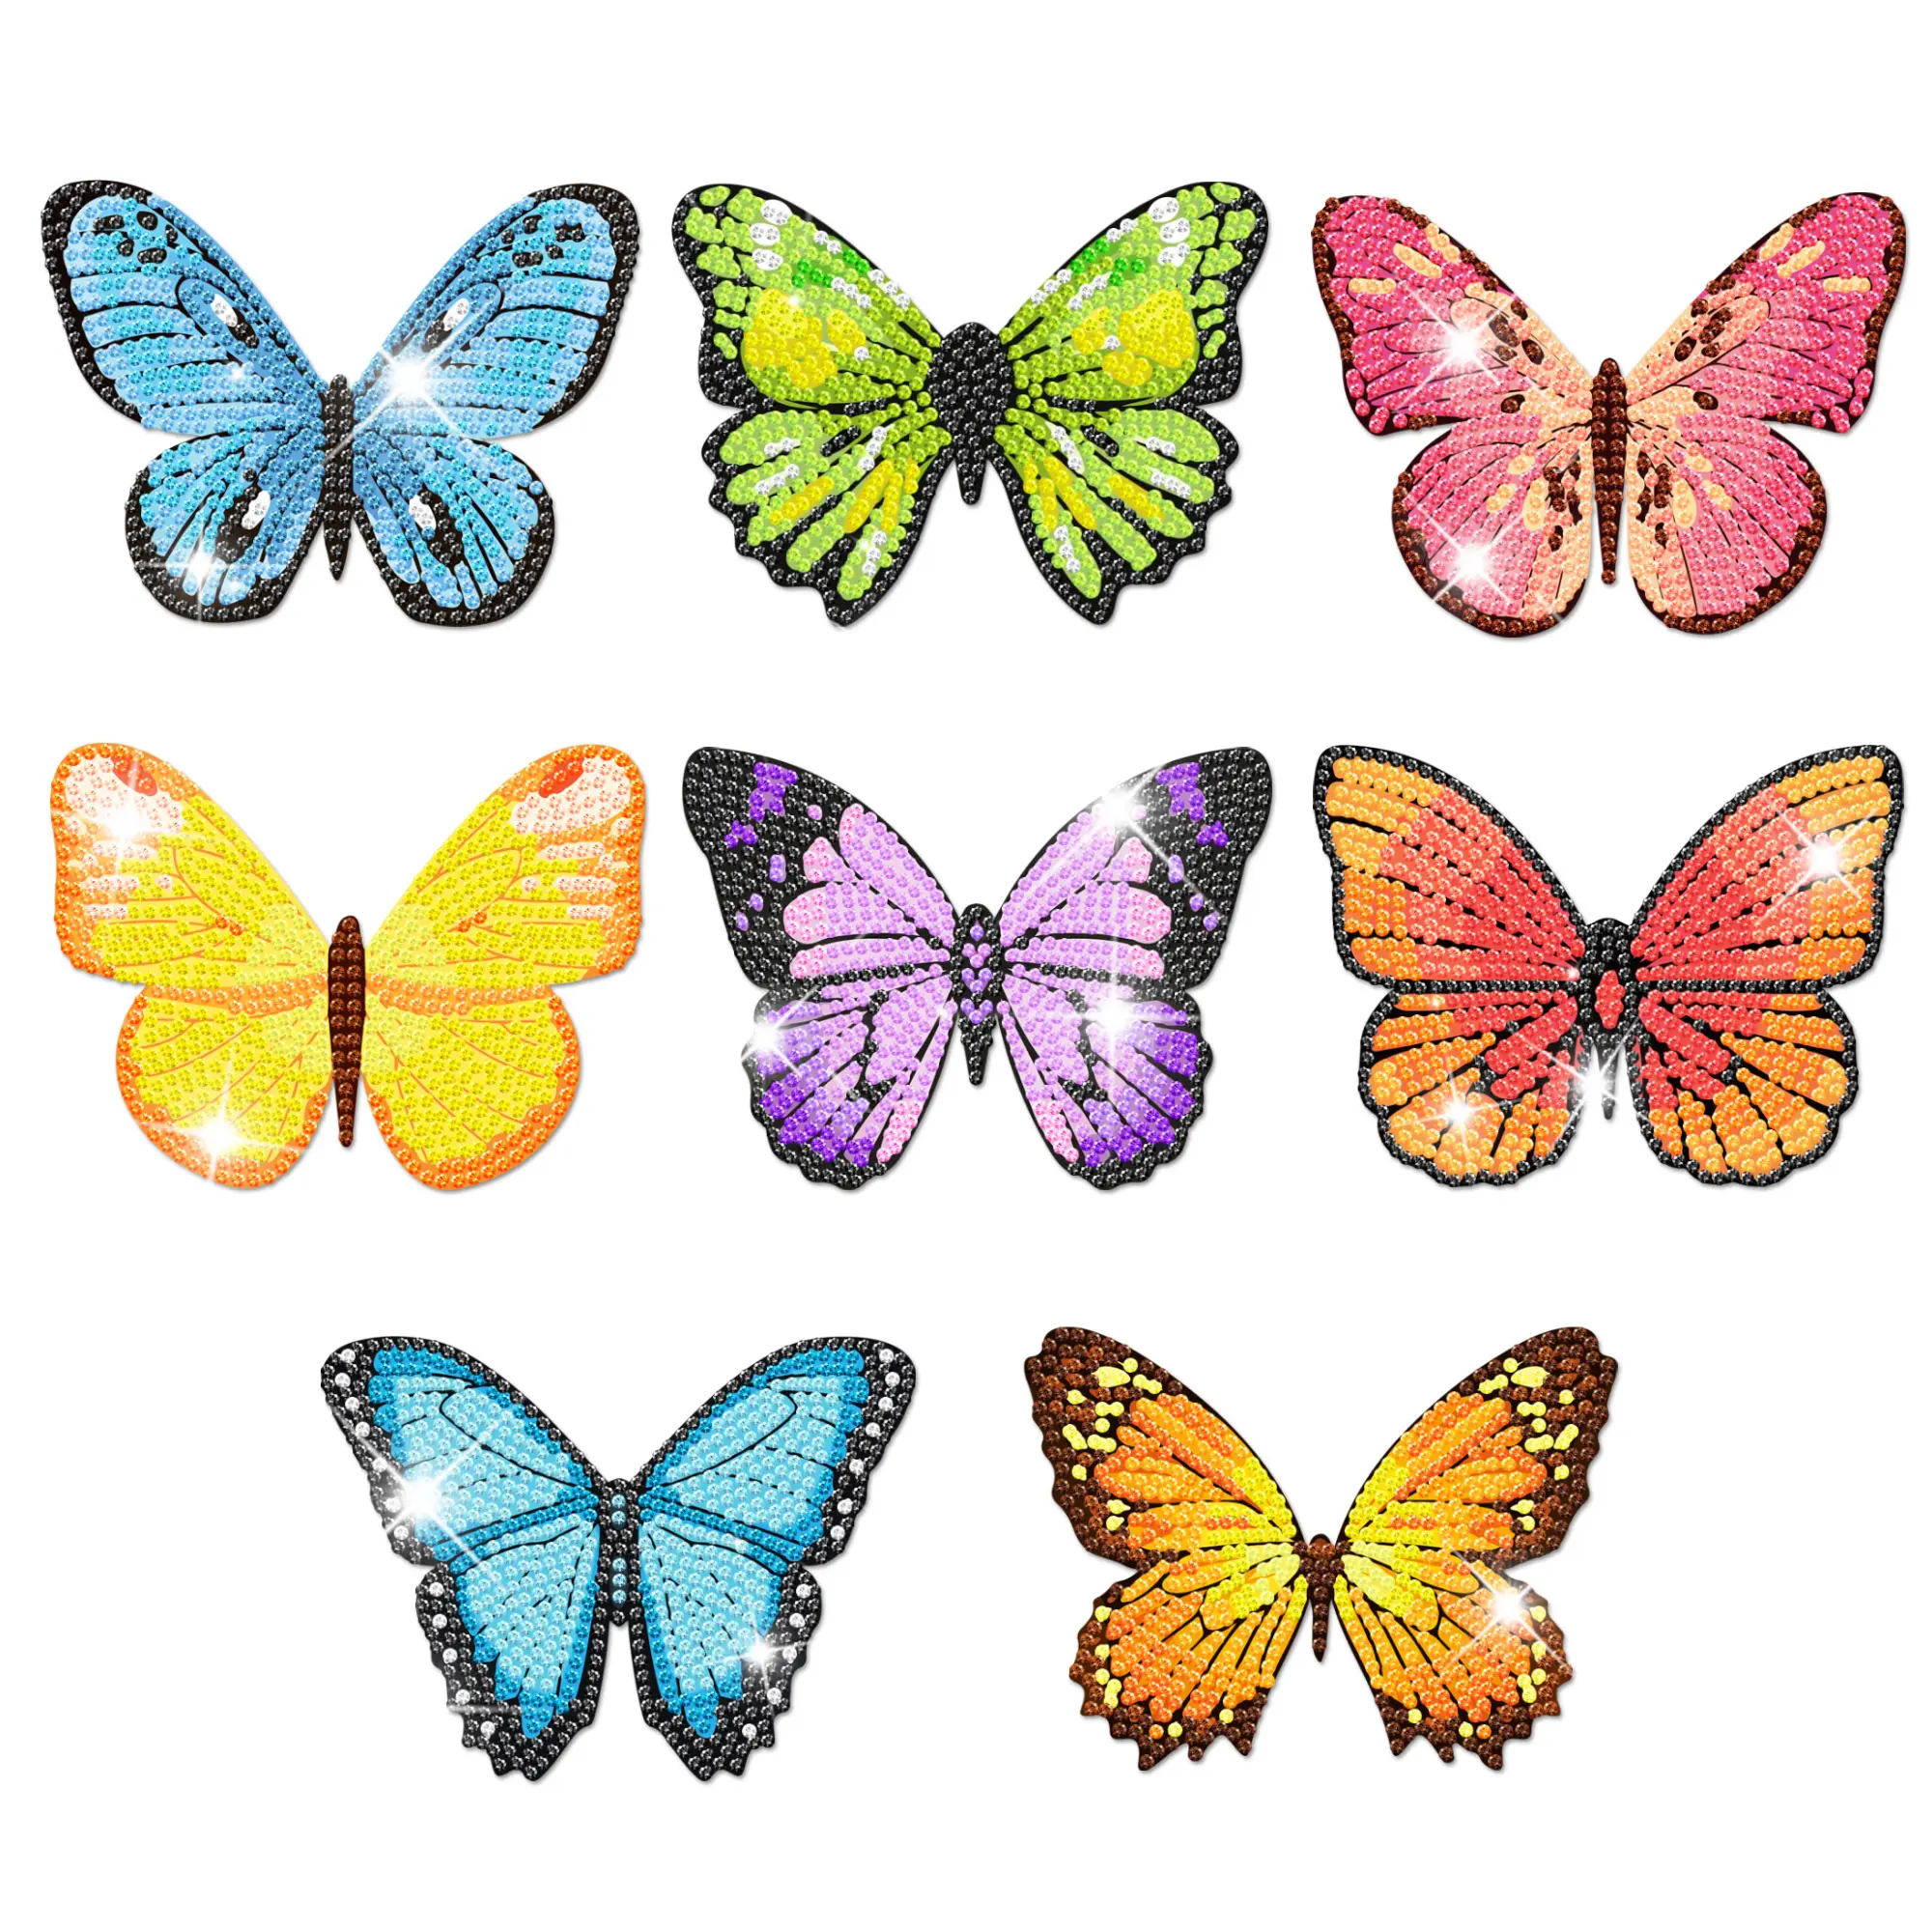 Huancai 8PCS Butterfly Stakes Diamond Painting DIY Diamond Art Kits for for Indoor Outdoor Garden Yard Decoration Party Supplies